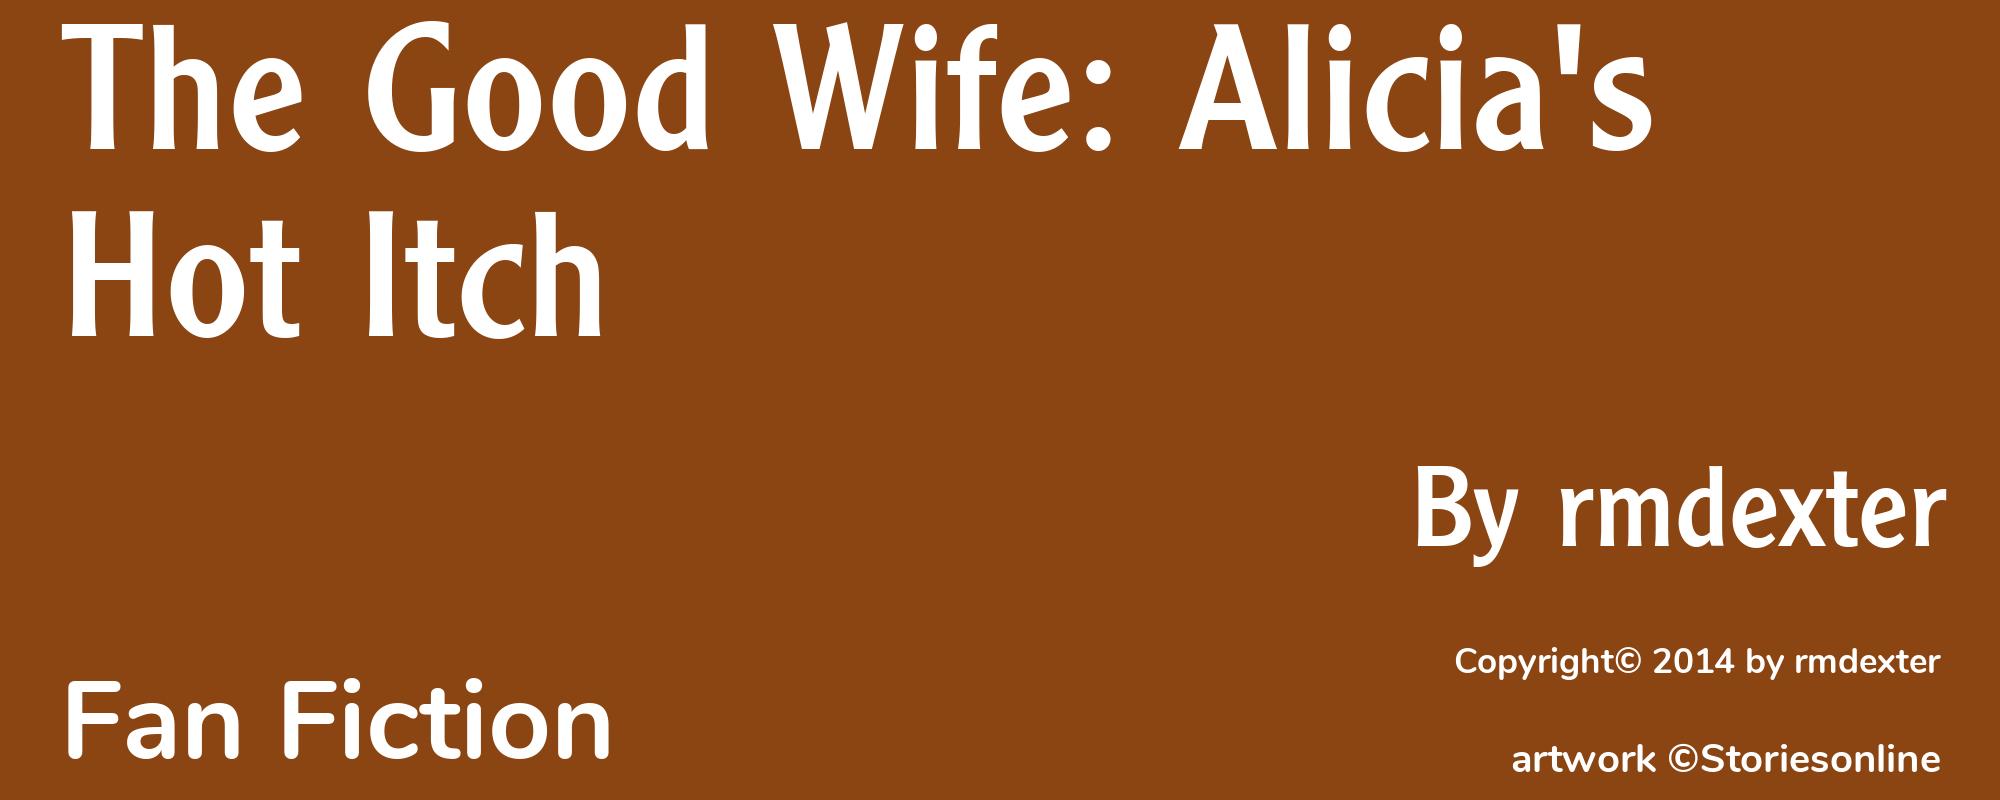 The Good Wife: Alicia's Hot Itch - Cover